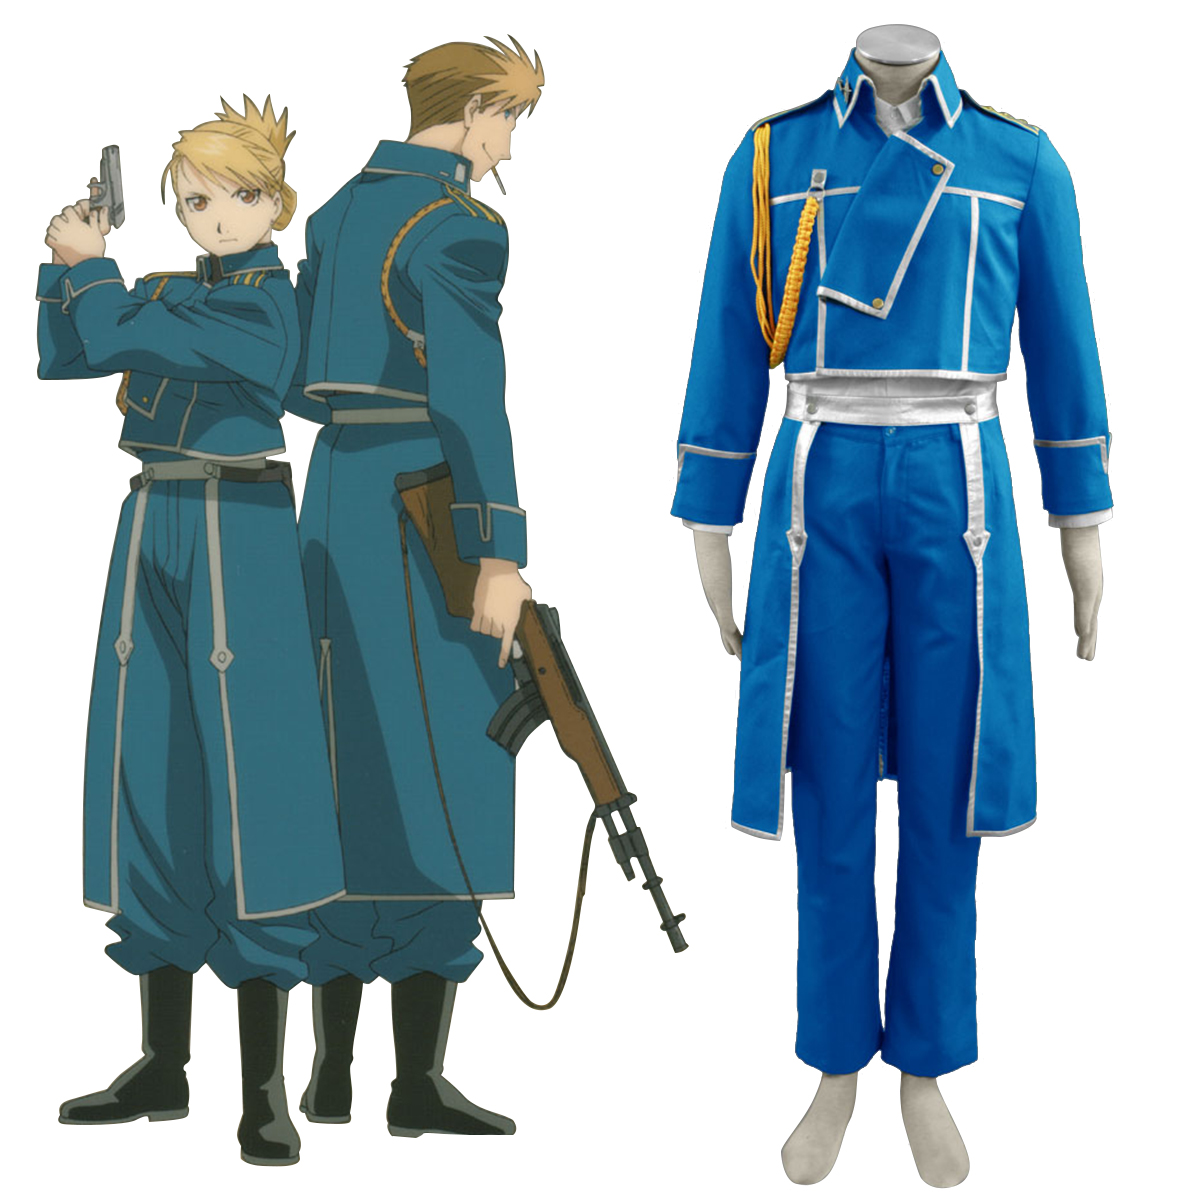 Fullmetal Alchemist Male Military Uniform Anime Cosplay Costumes Outfit